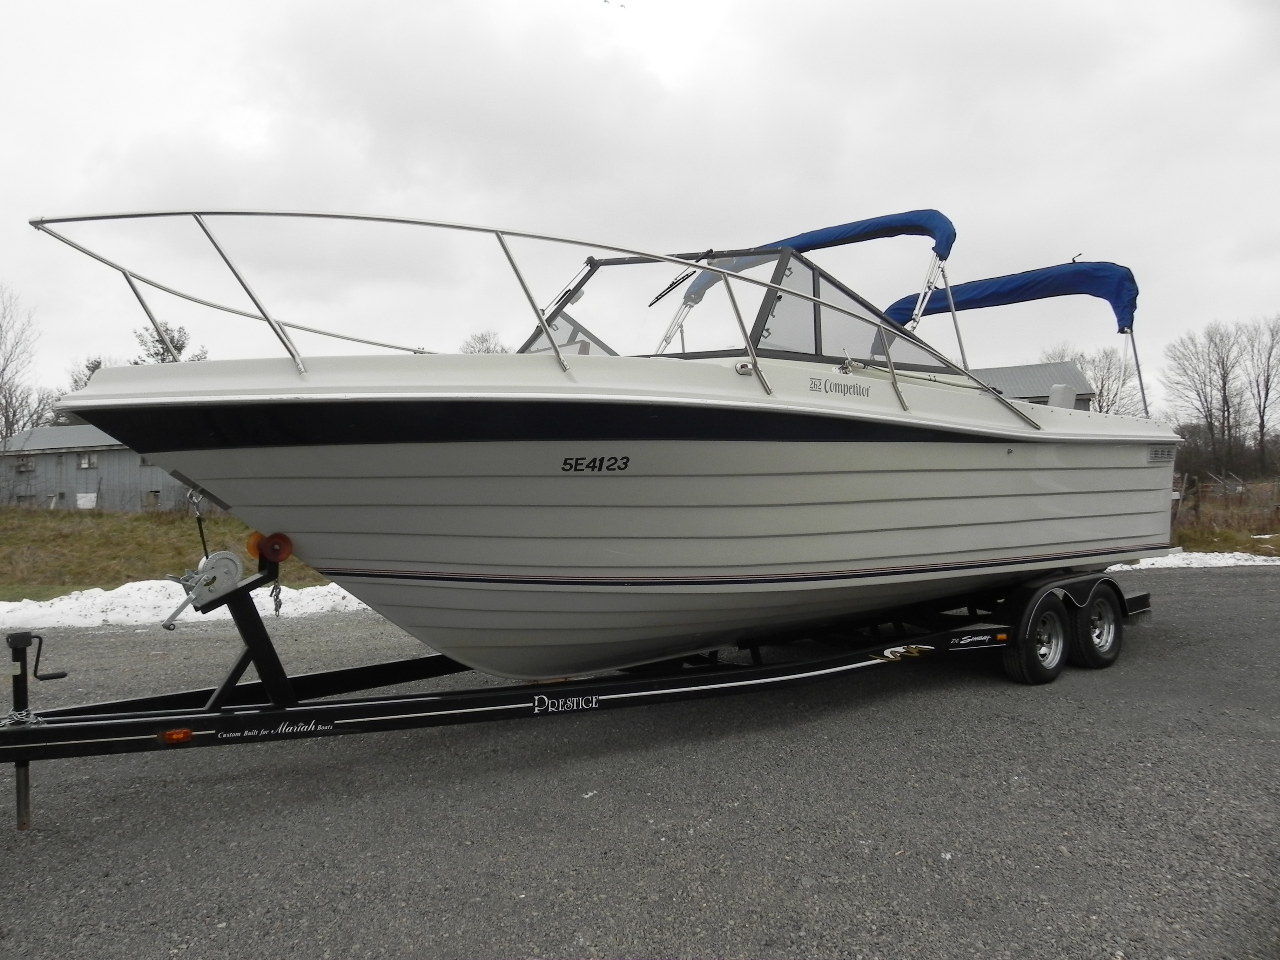 Penn Yan 262 Competitor 1996 For Sale For 18 800 Boats From Usa Com